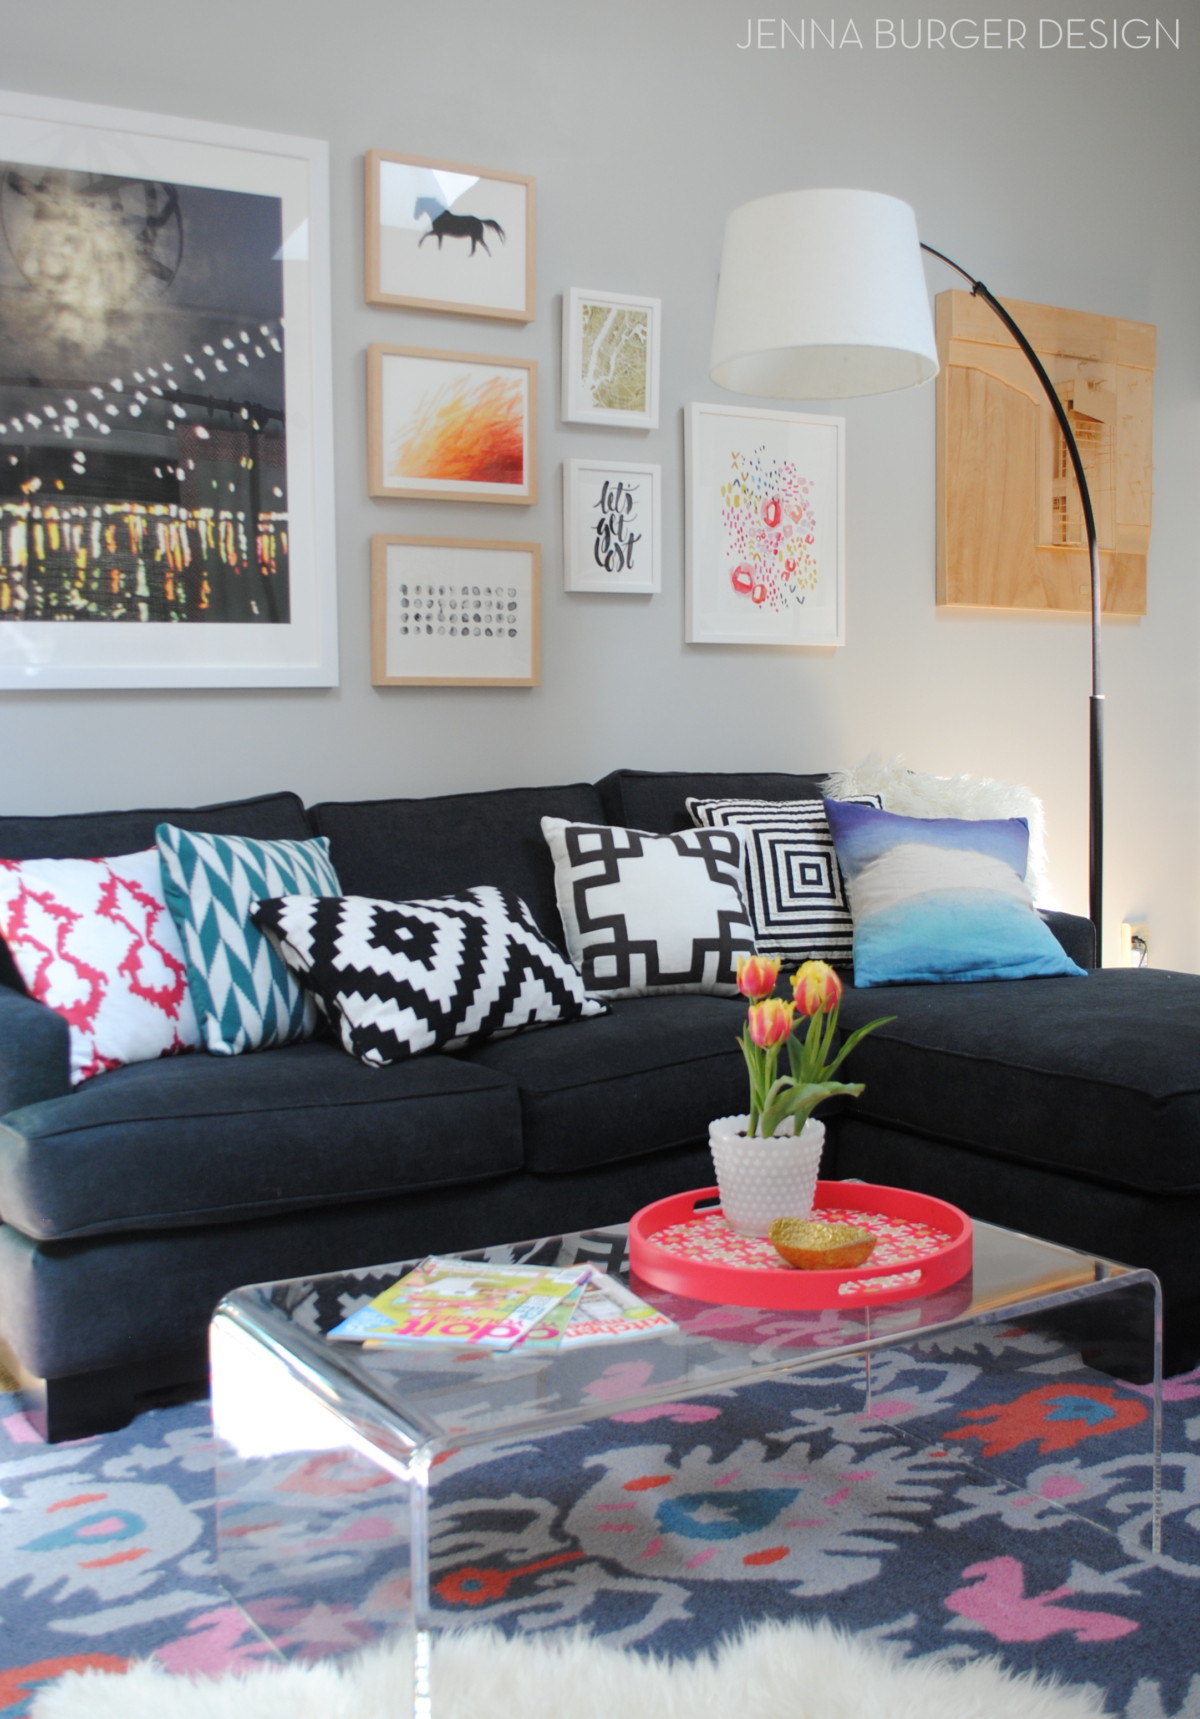 Sofa with eclectic patterned throw pillows via Jenna Burger